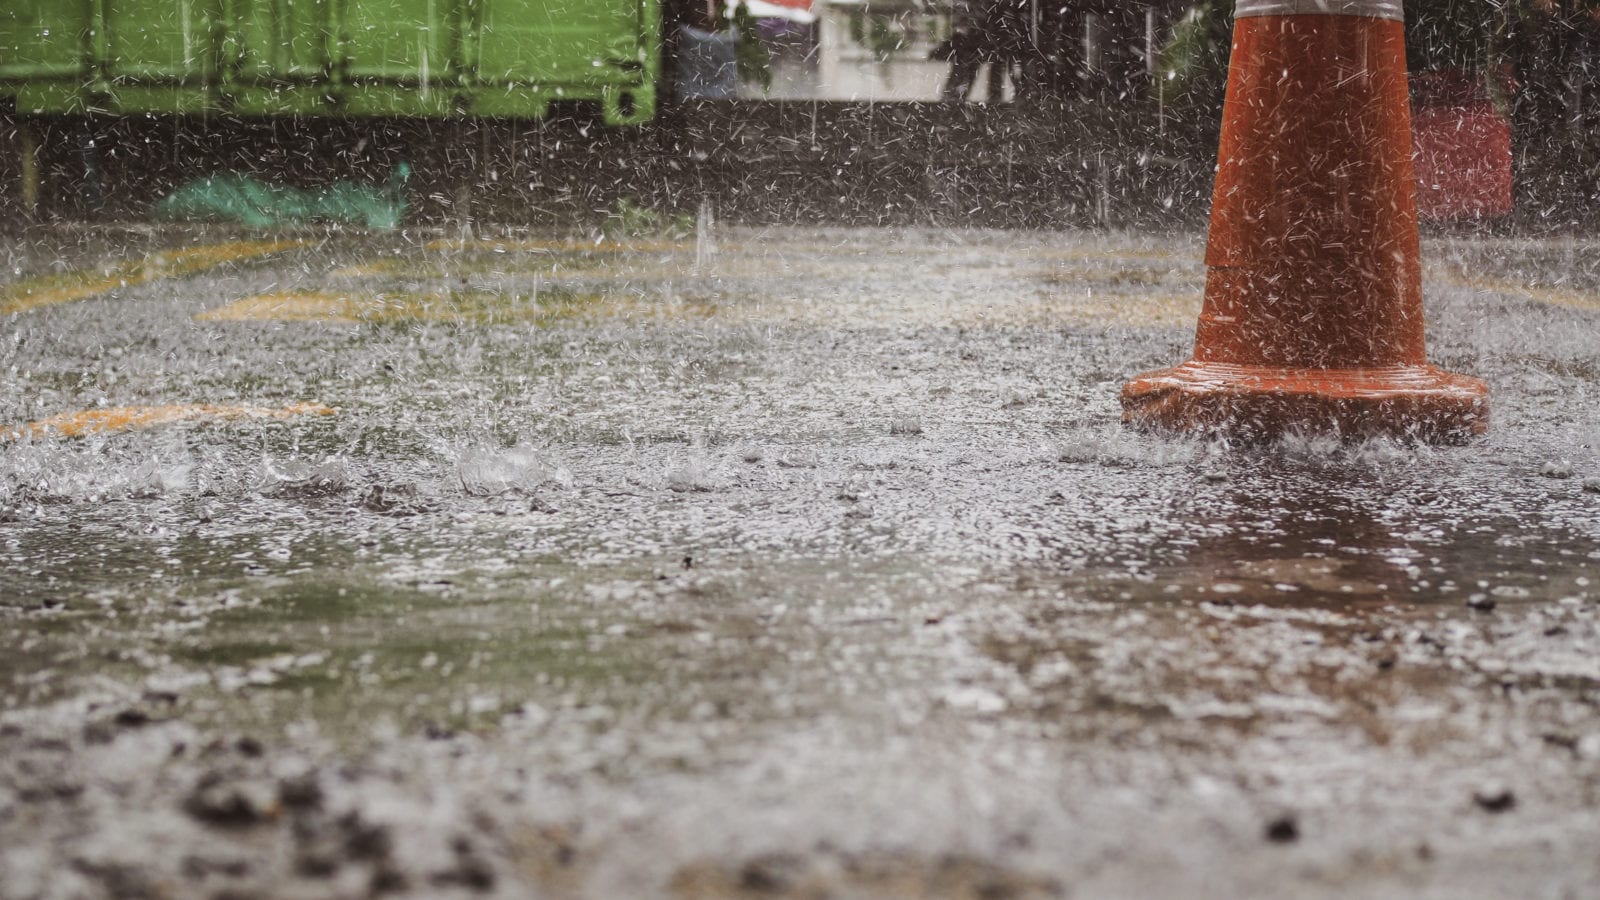 Rainy season construction can be a hassle, but it doesn't have to be